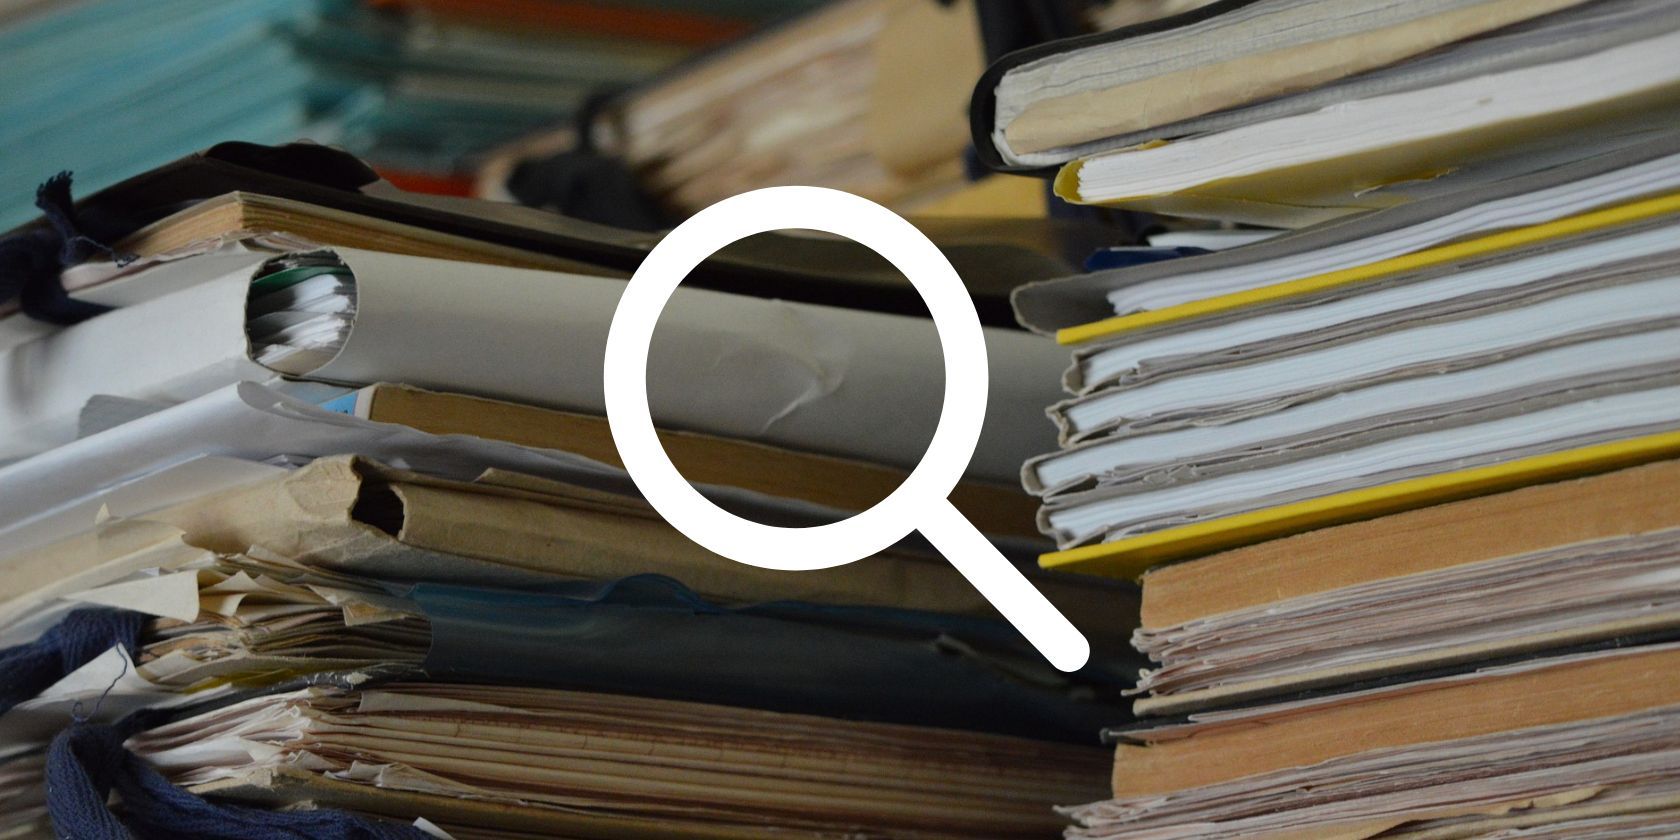 magnifying glass in front of file stack